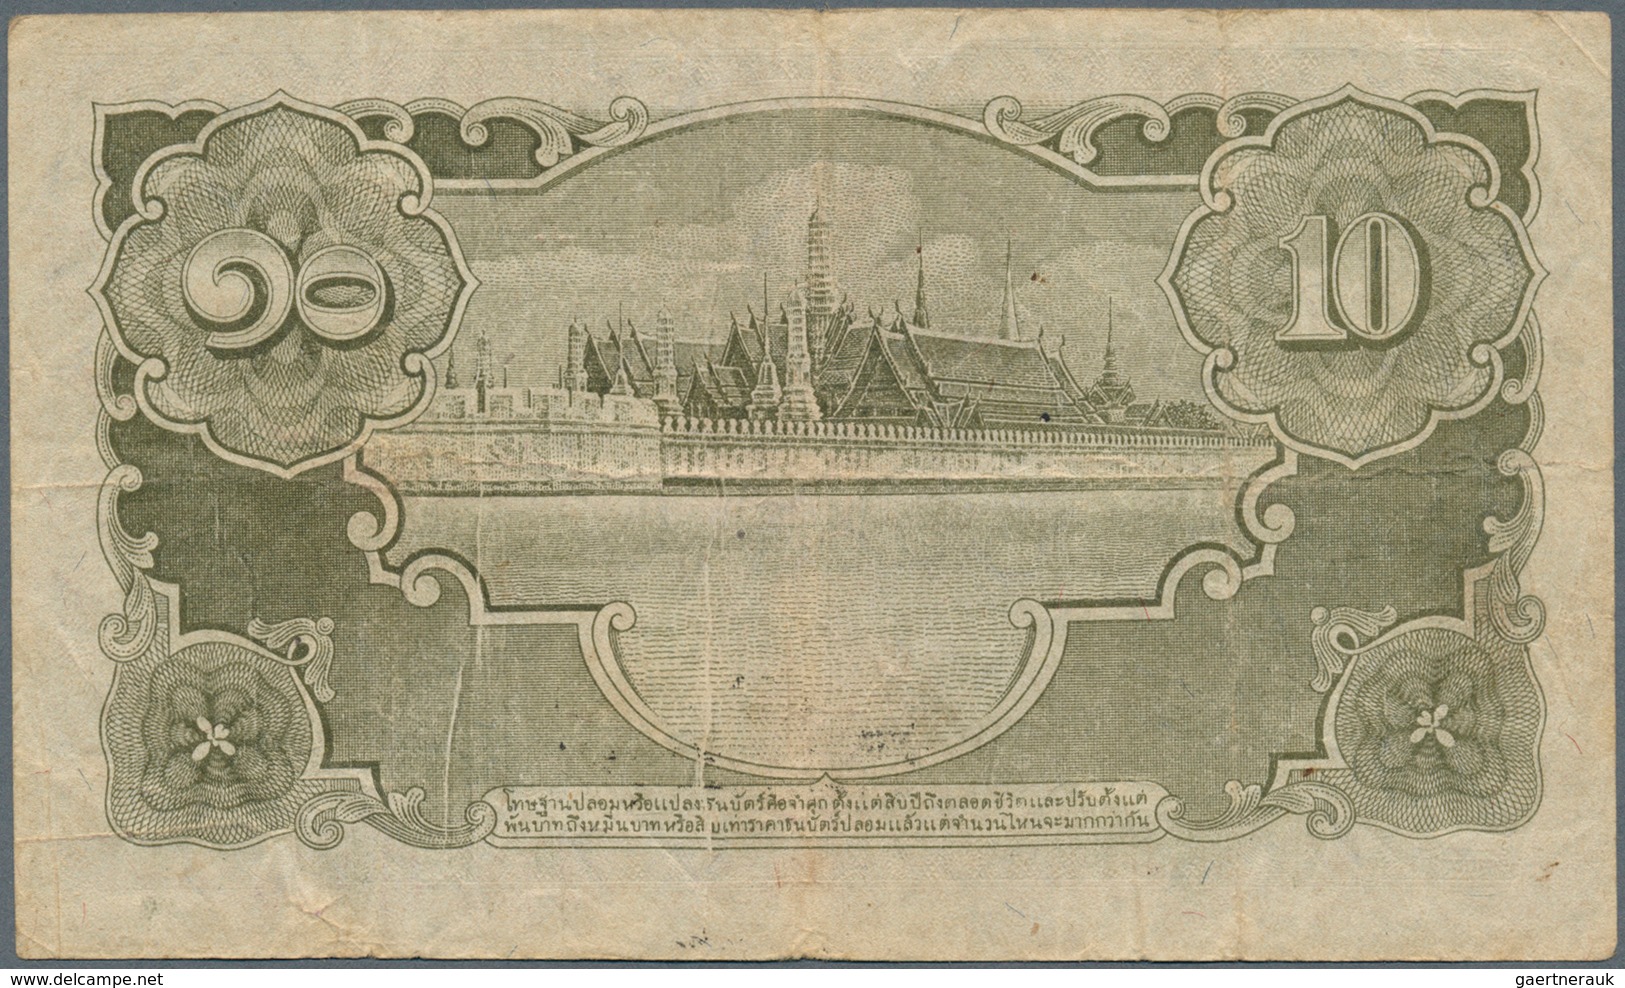 02484 Thailand: 10 Baht ND(1945) P. 48, Used With Folds And Creases, No Holes Or Tears, Still Strongness I - Tailandia